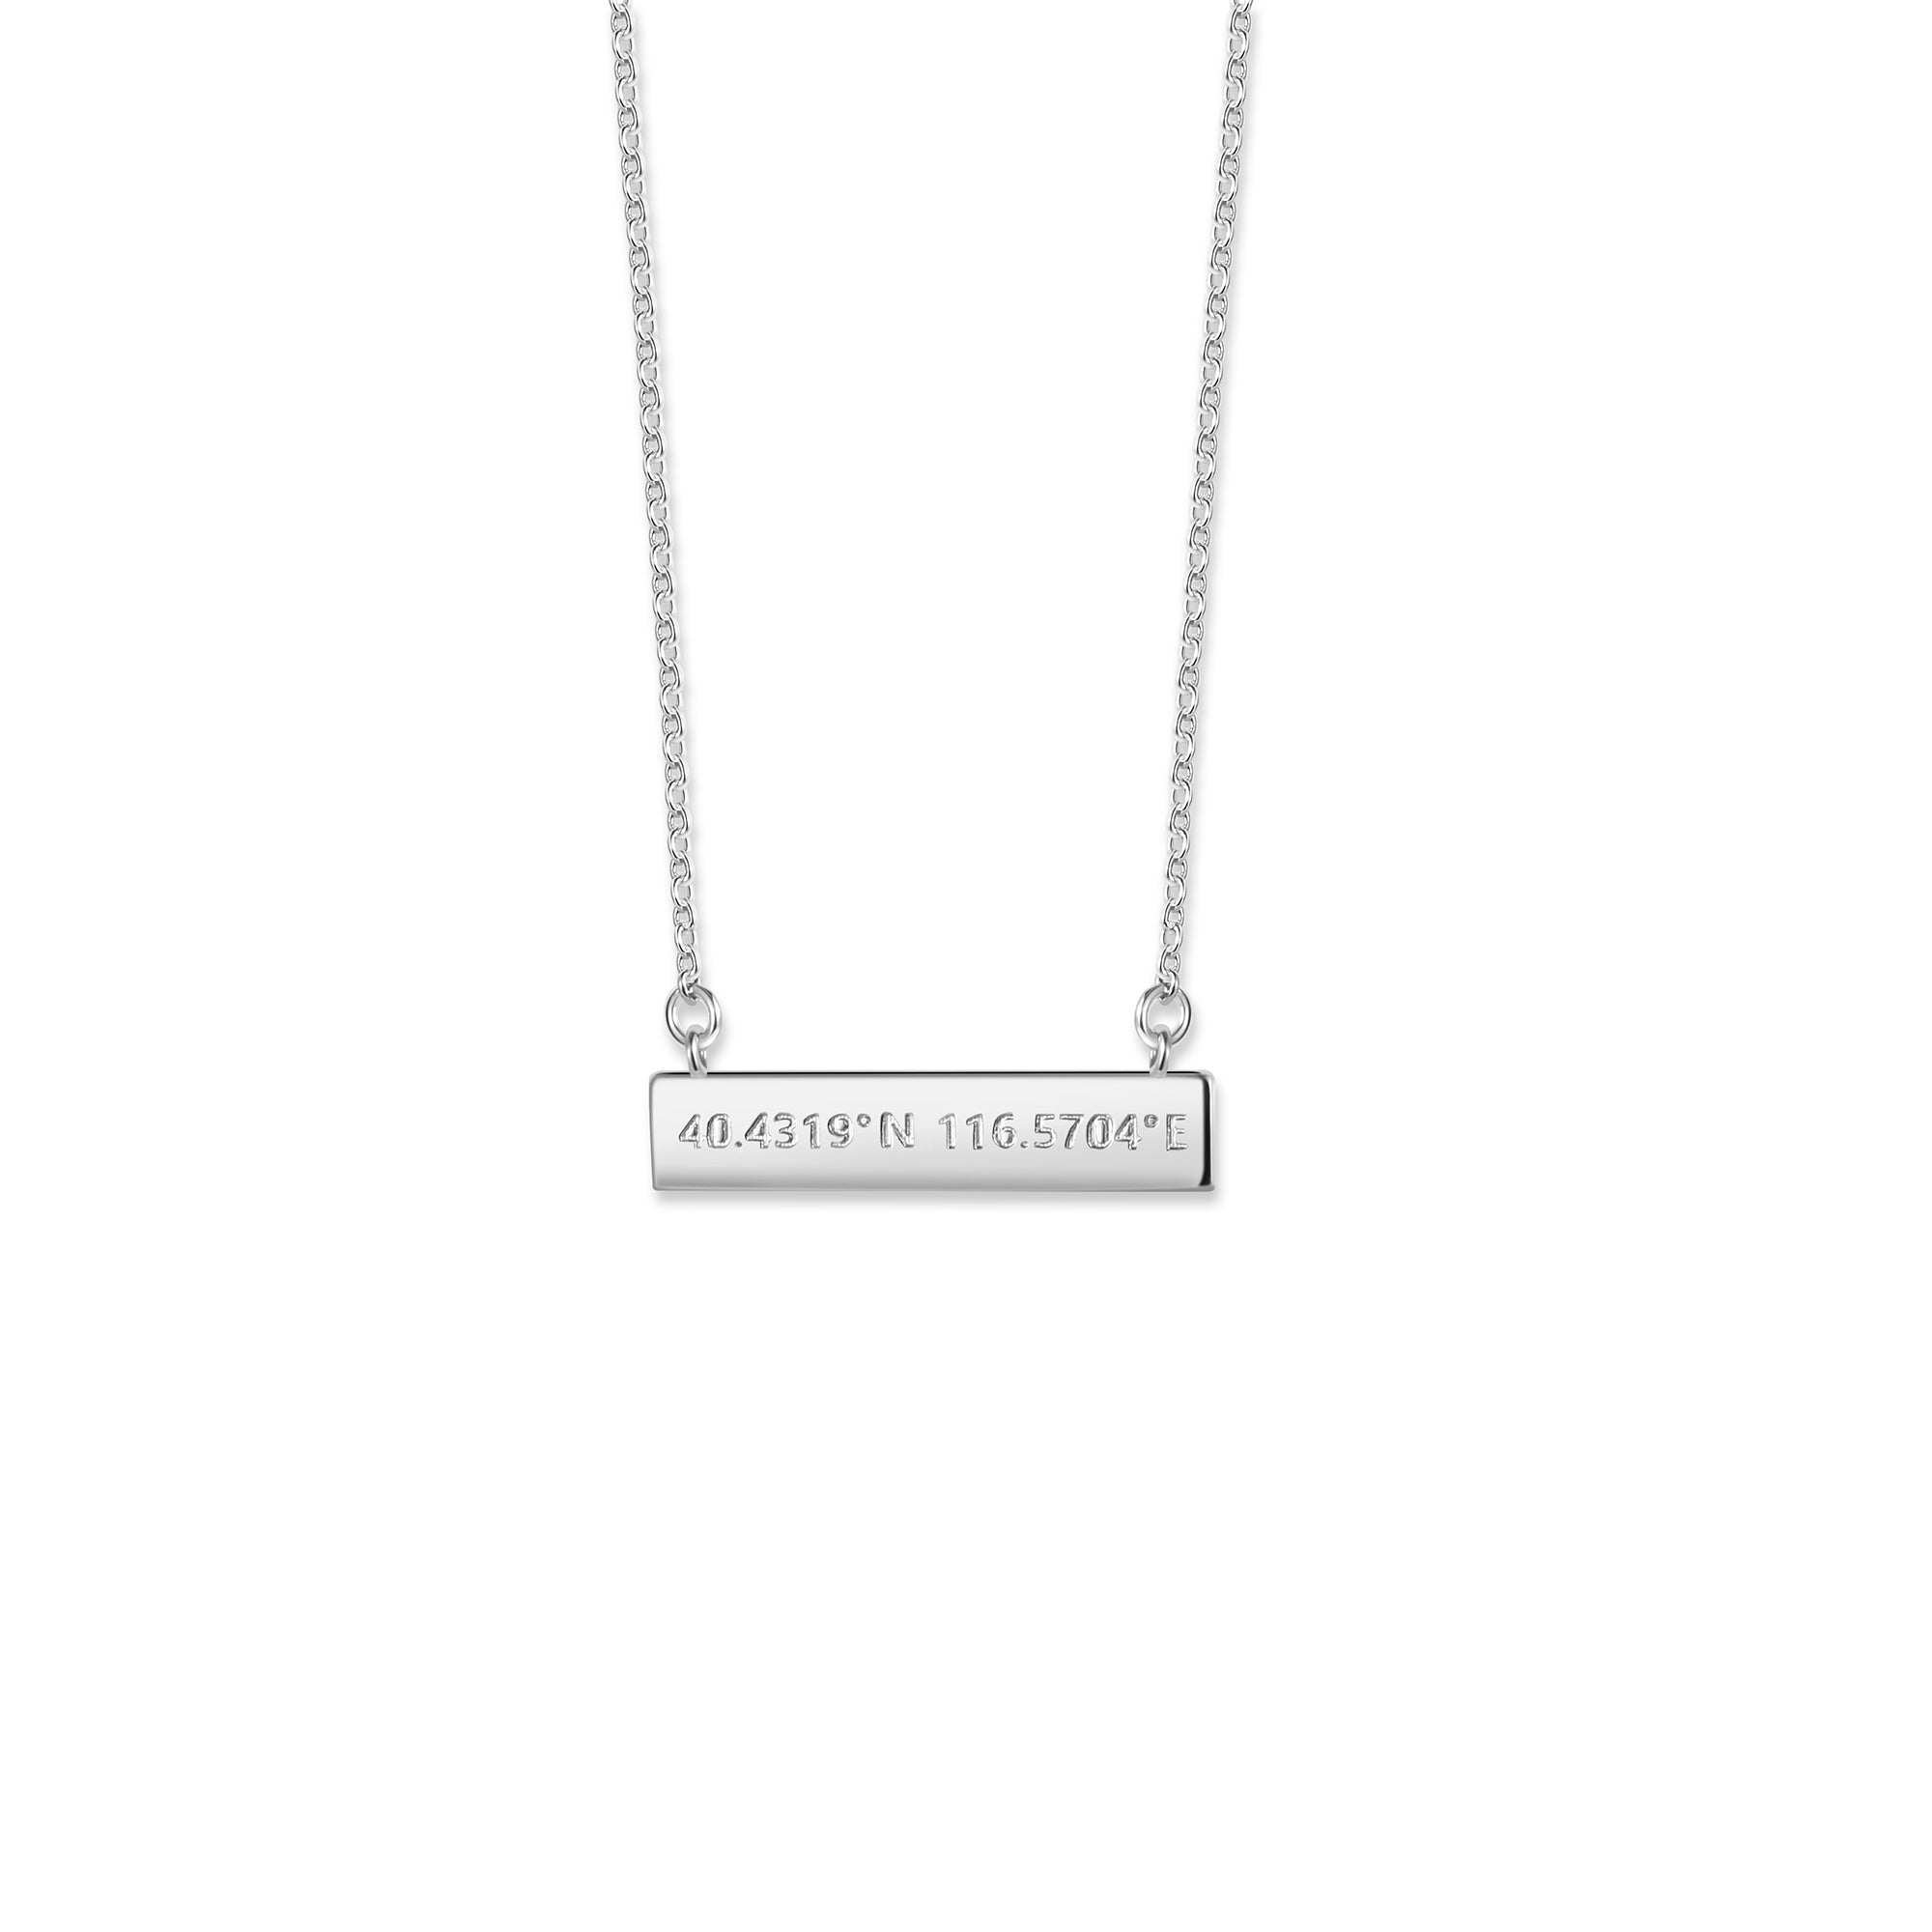 solid gold pendant for women, personalized bar necklace, white gold necklace for women